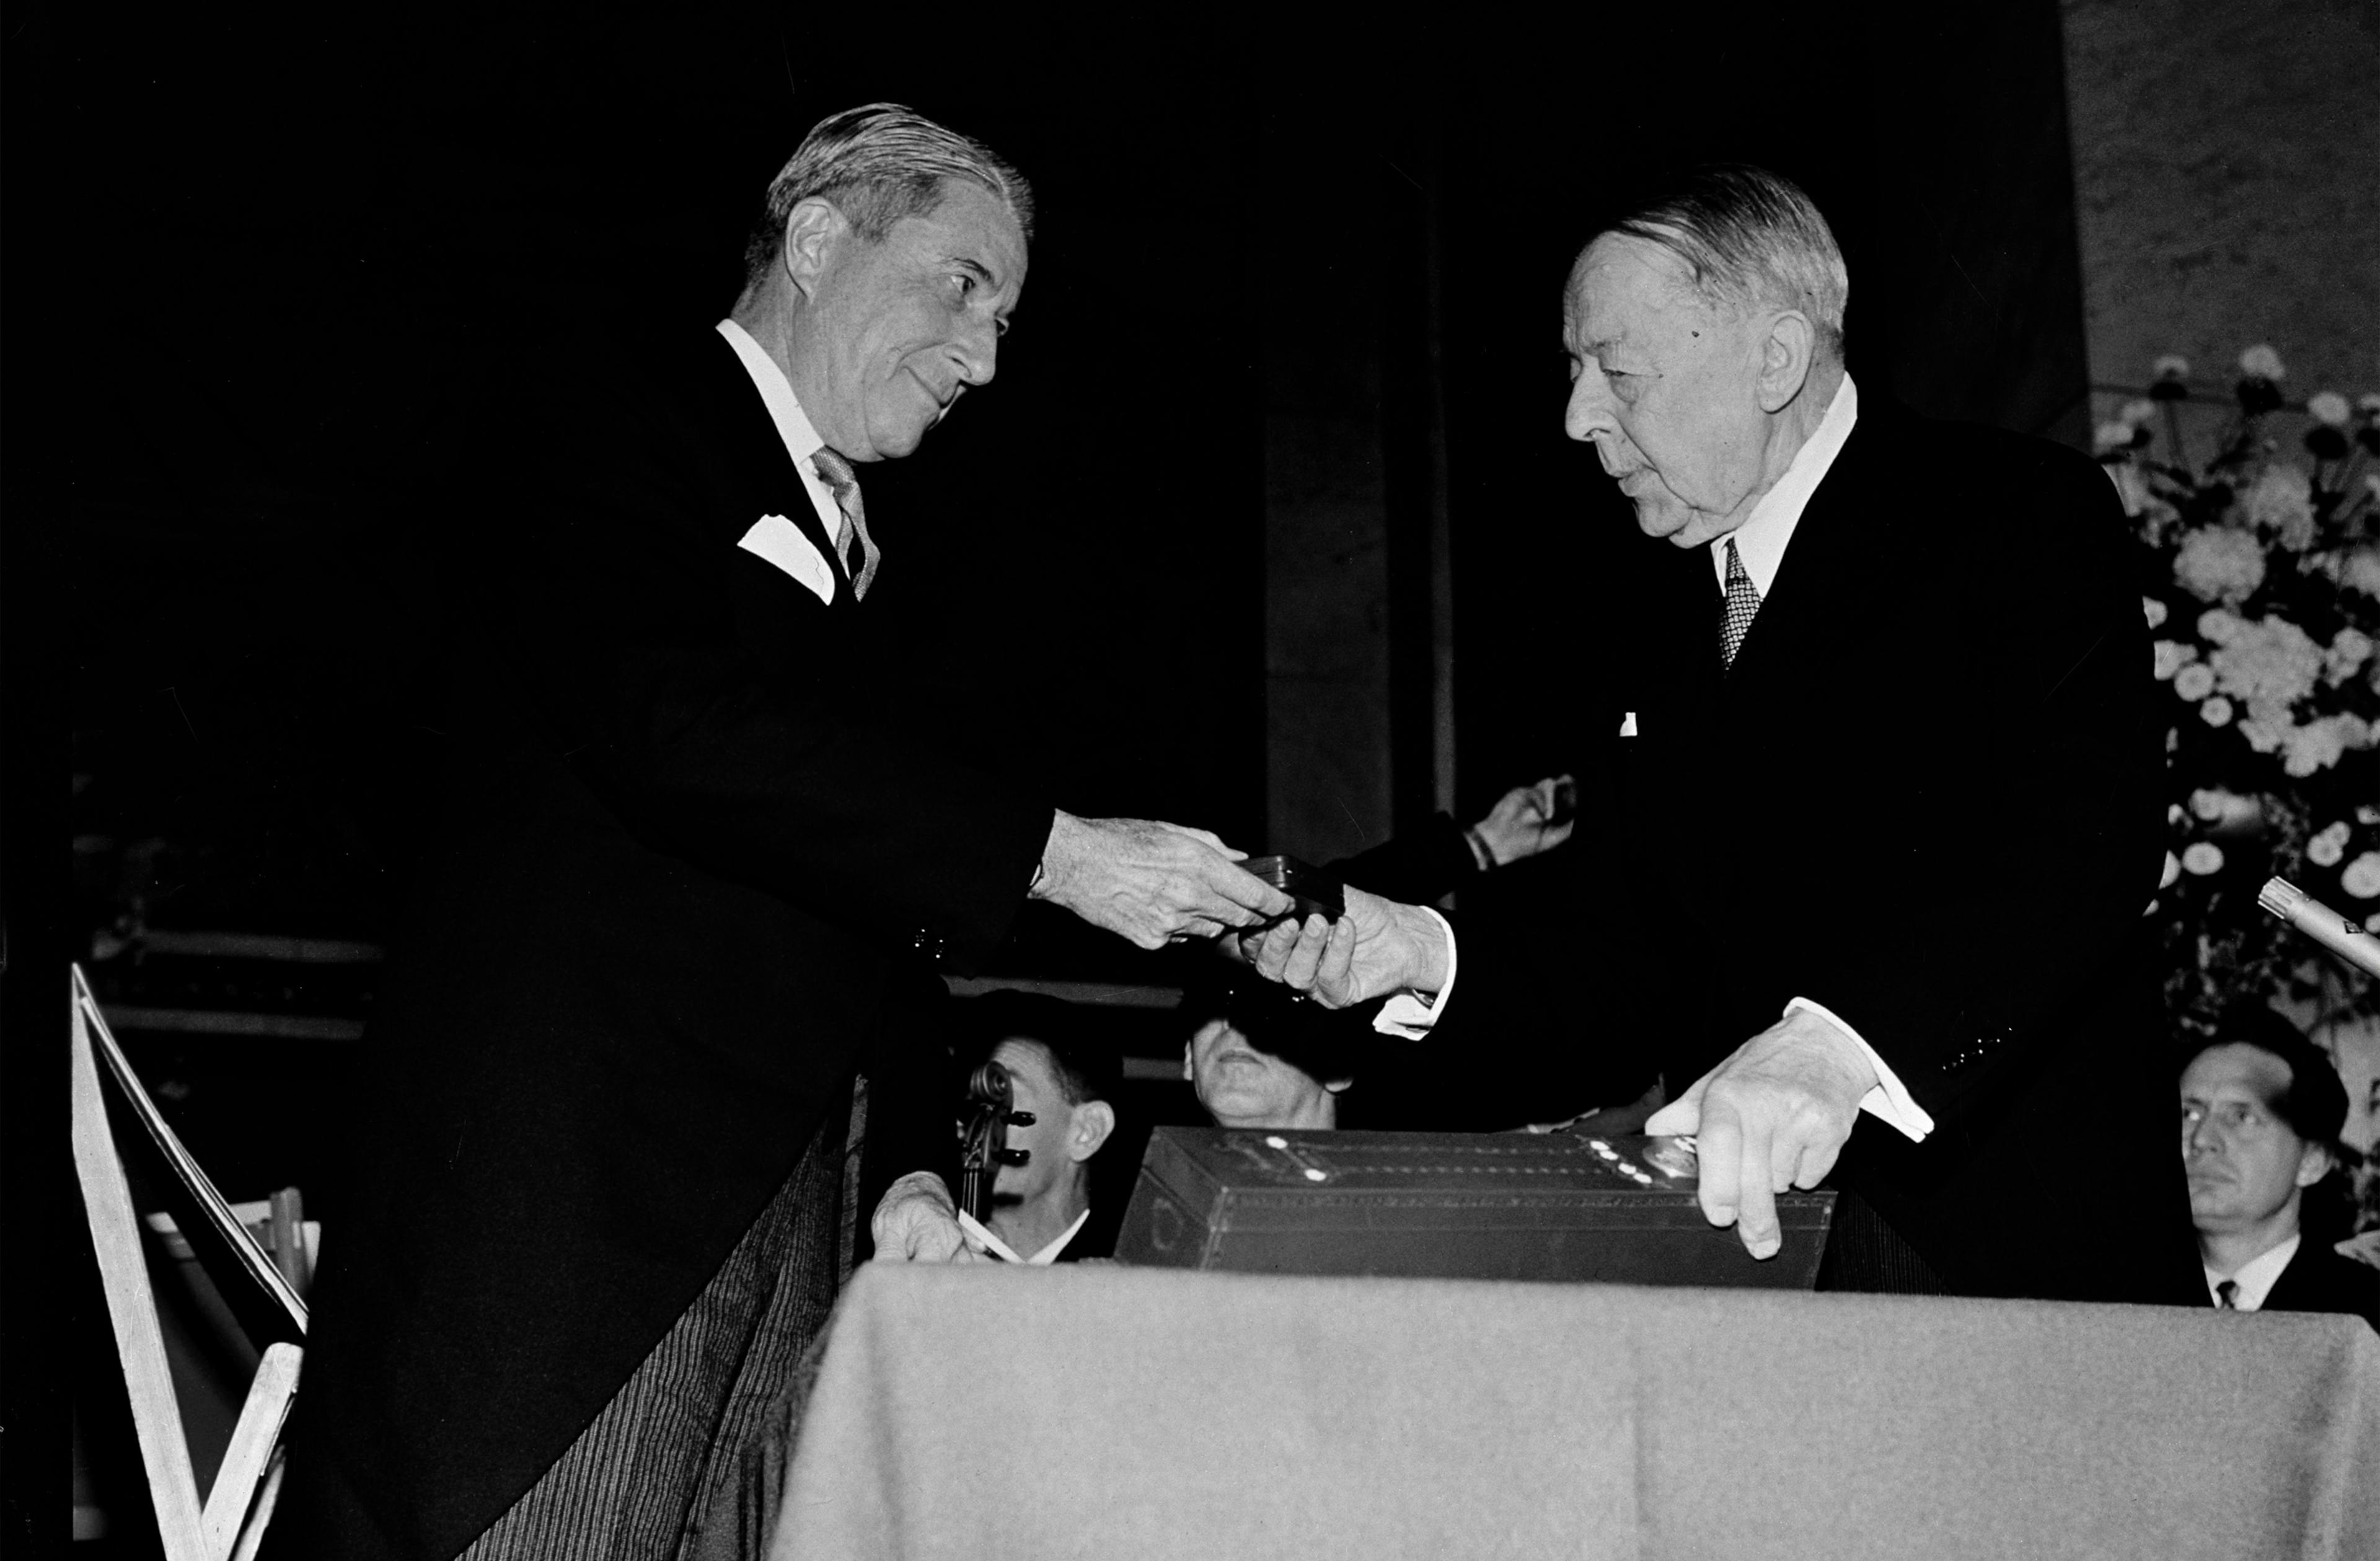 UNICEF Executive Director Henry Labouisse (left), receives the Nobel Peace prize medal on behalf of UNICEF, presented by Nobel Committee Chairman of the Norwegian Parliament, Gunnar Jahn, at the prize ceremonies at Oslo University in Oslo, the capital.